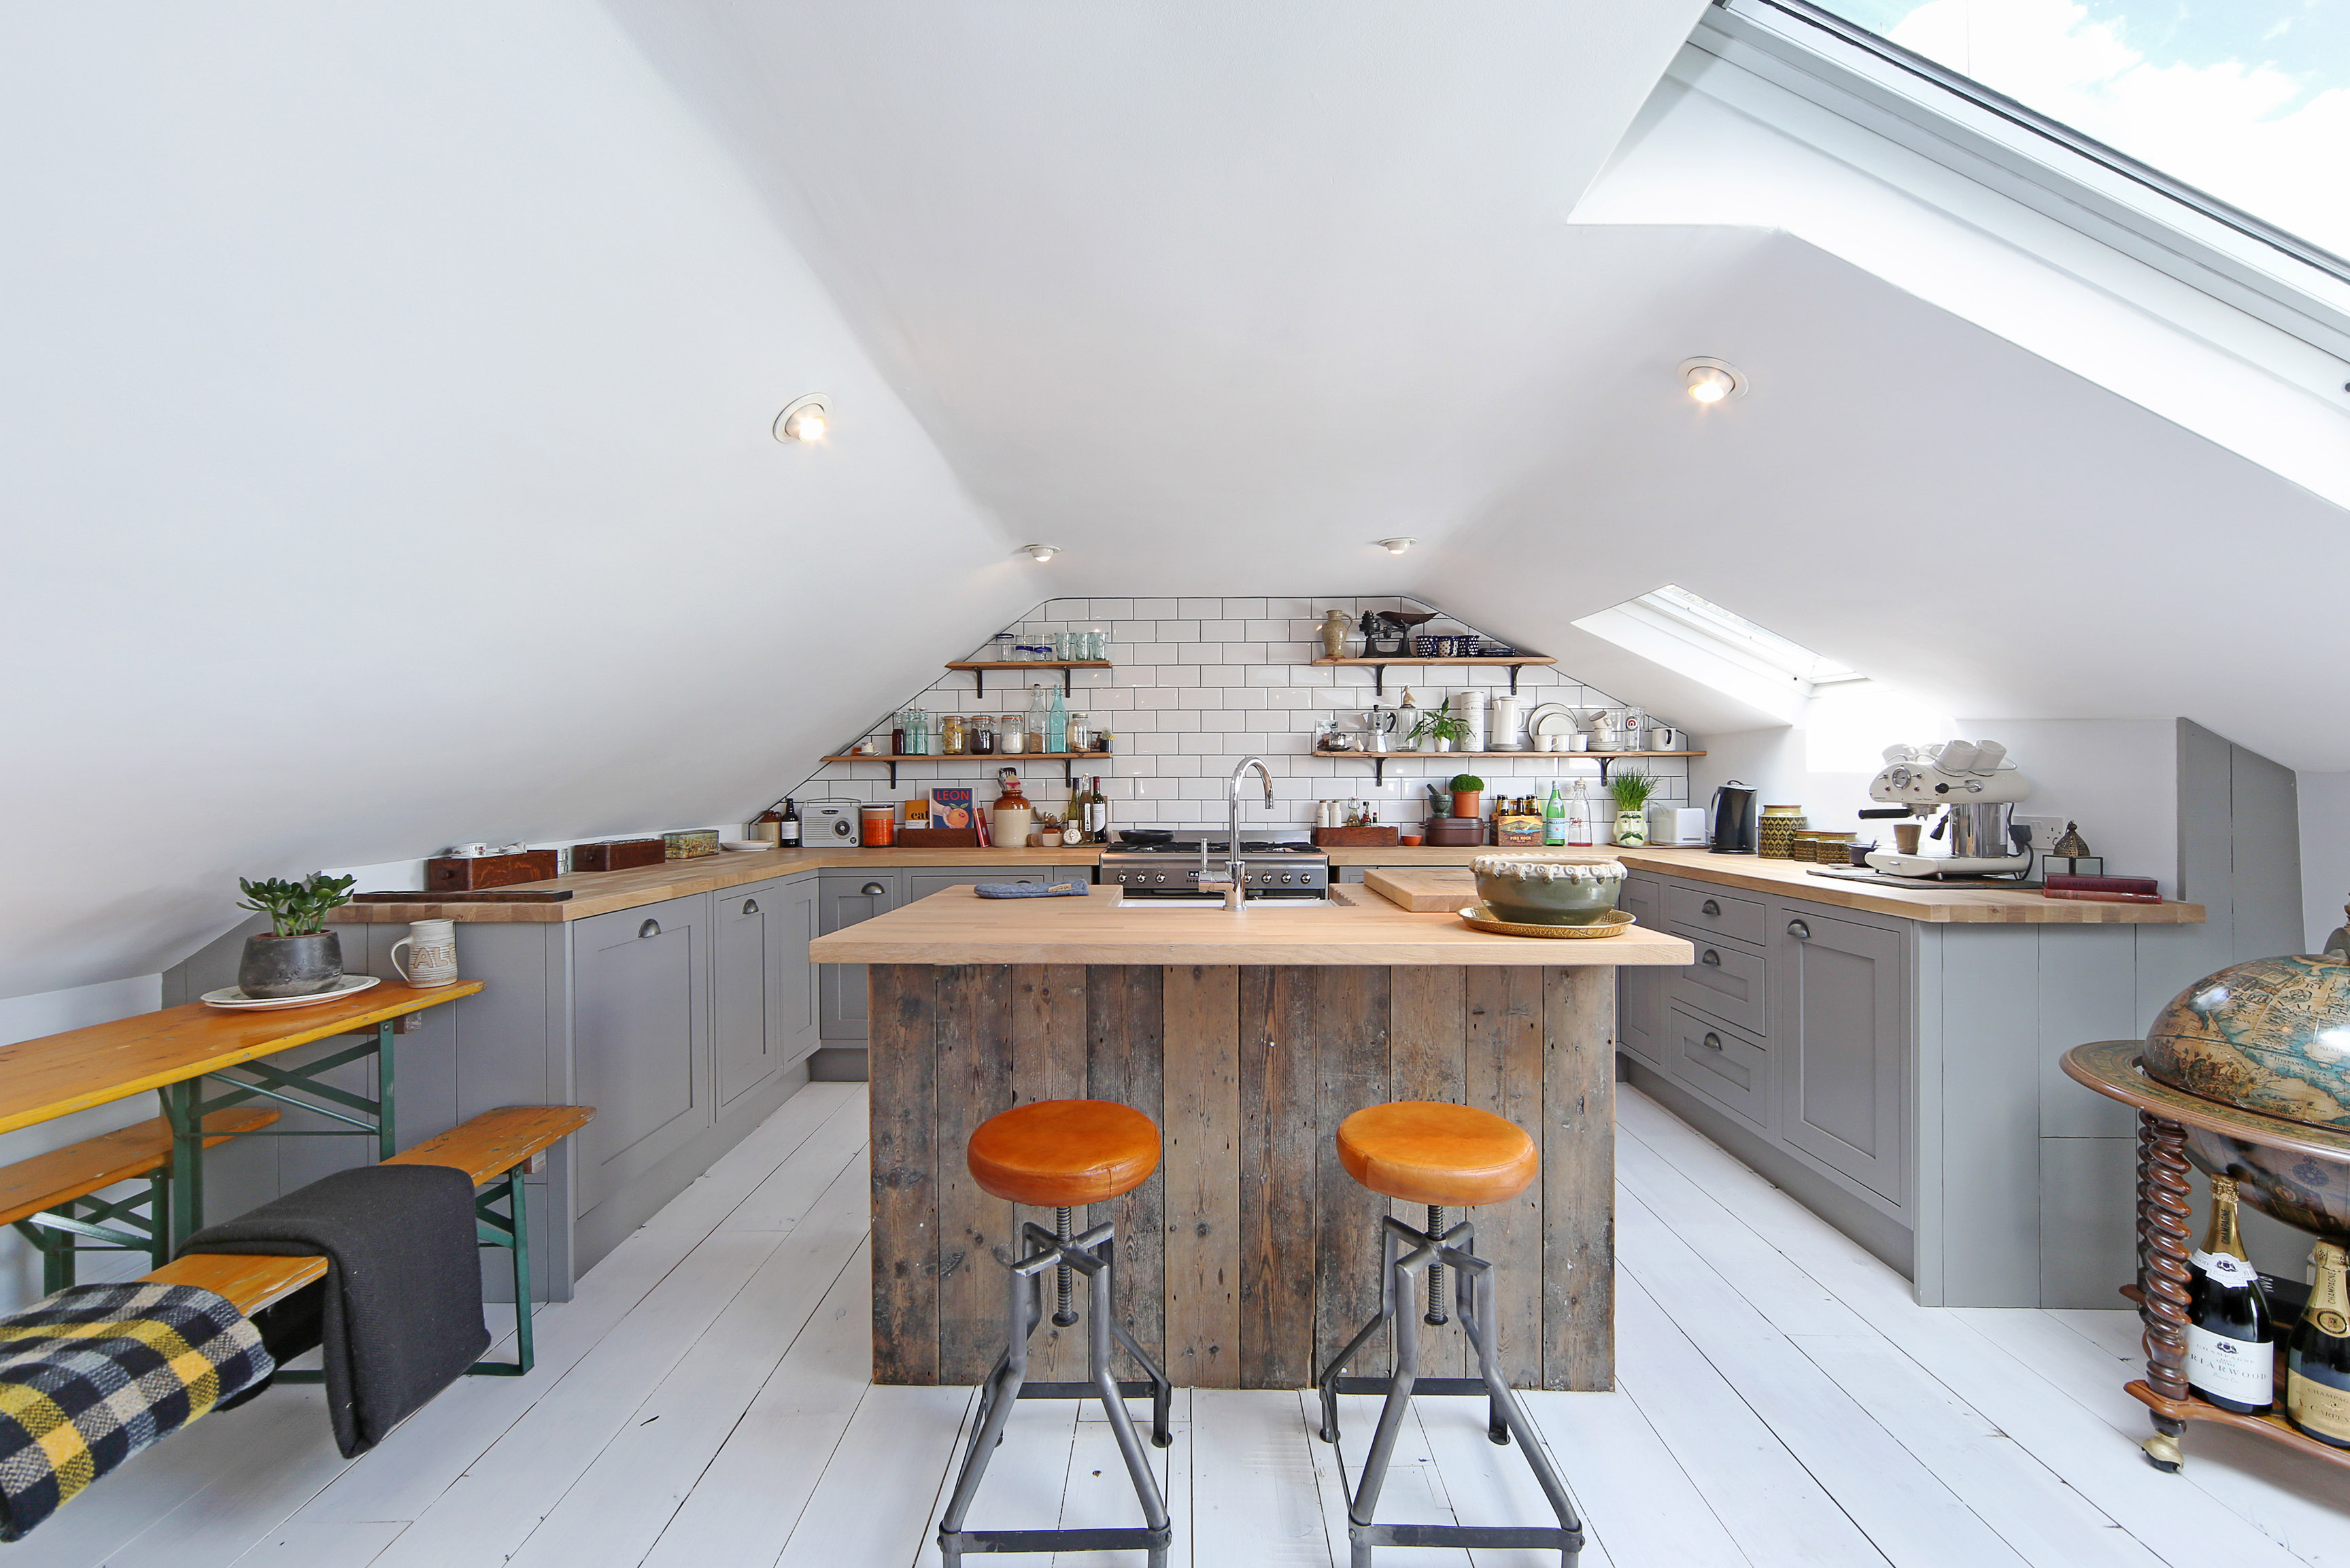 </p> <p>Find your ideal home design pro on designfor-me.com - get matched and see who's interested in your home project. Click image to see more inspiration from our design pros</p> <p>Design by Stephen, interior designer from Hackney, London</p> <p> #interiordesign #interiors #homedecor #homeinspiration #kitchens #kitchendesign #kitcheninspiration #kitchenideas #kitchengoals #loftextensions #loftextensiondesign </p> <p>